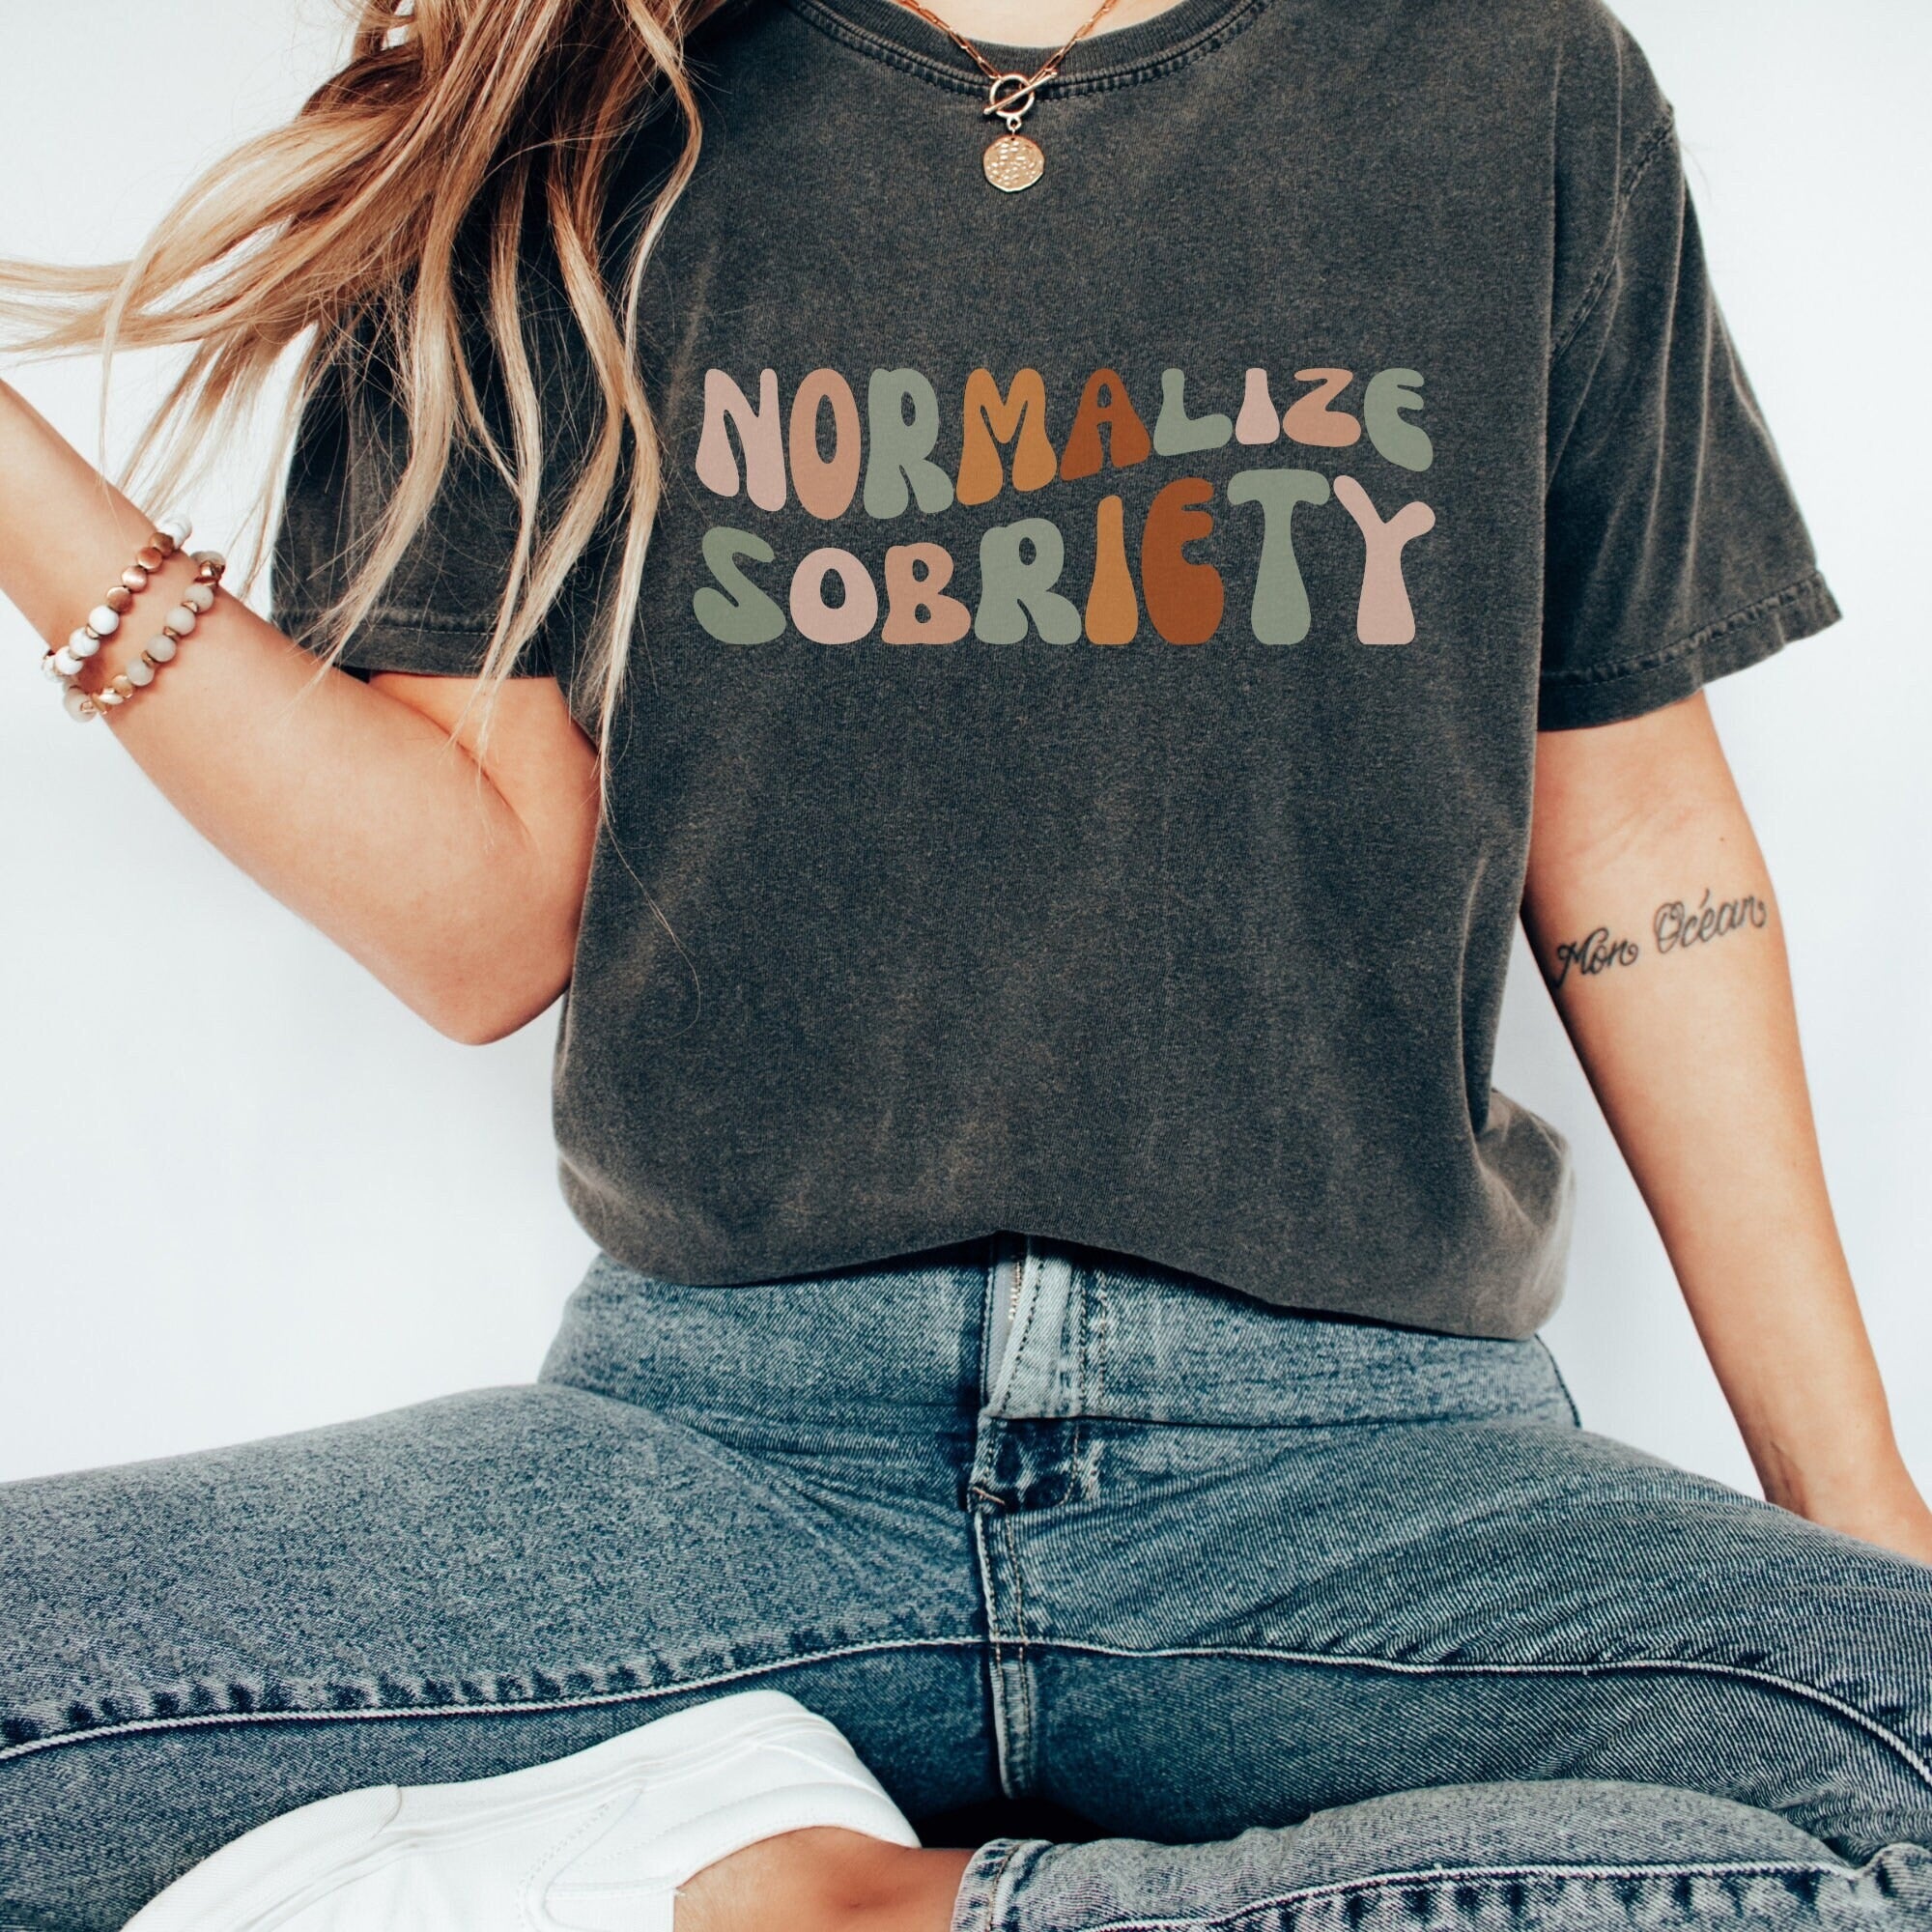 Normalize Sobriety Shirt